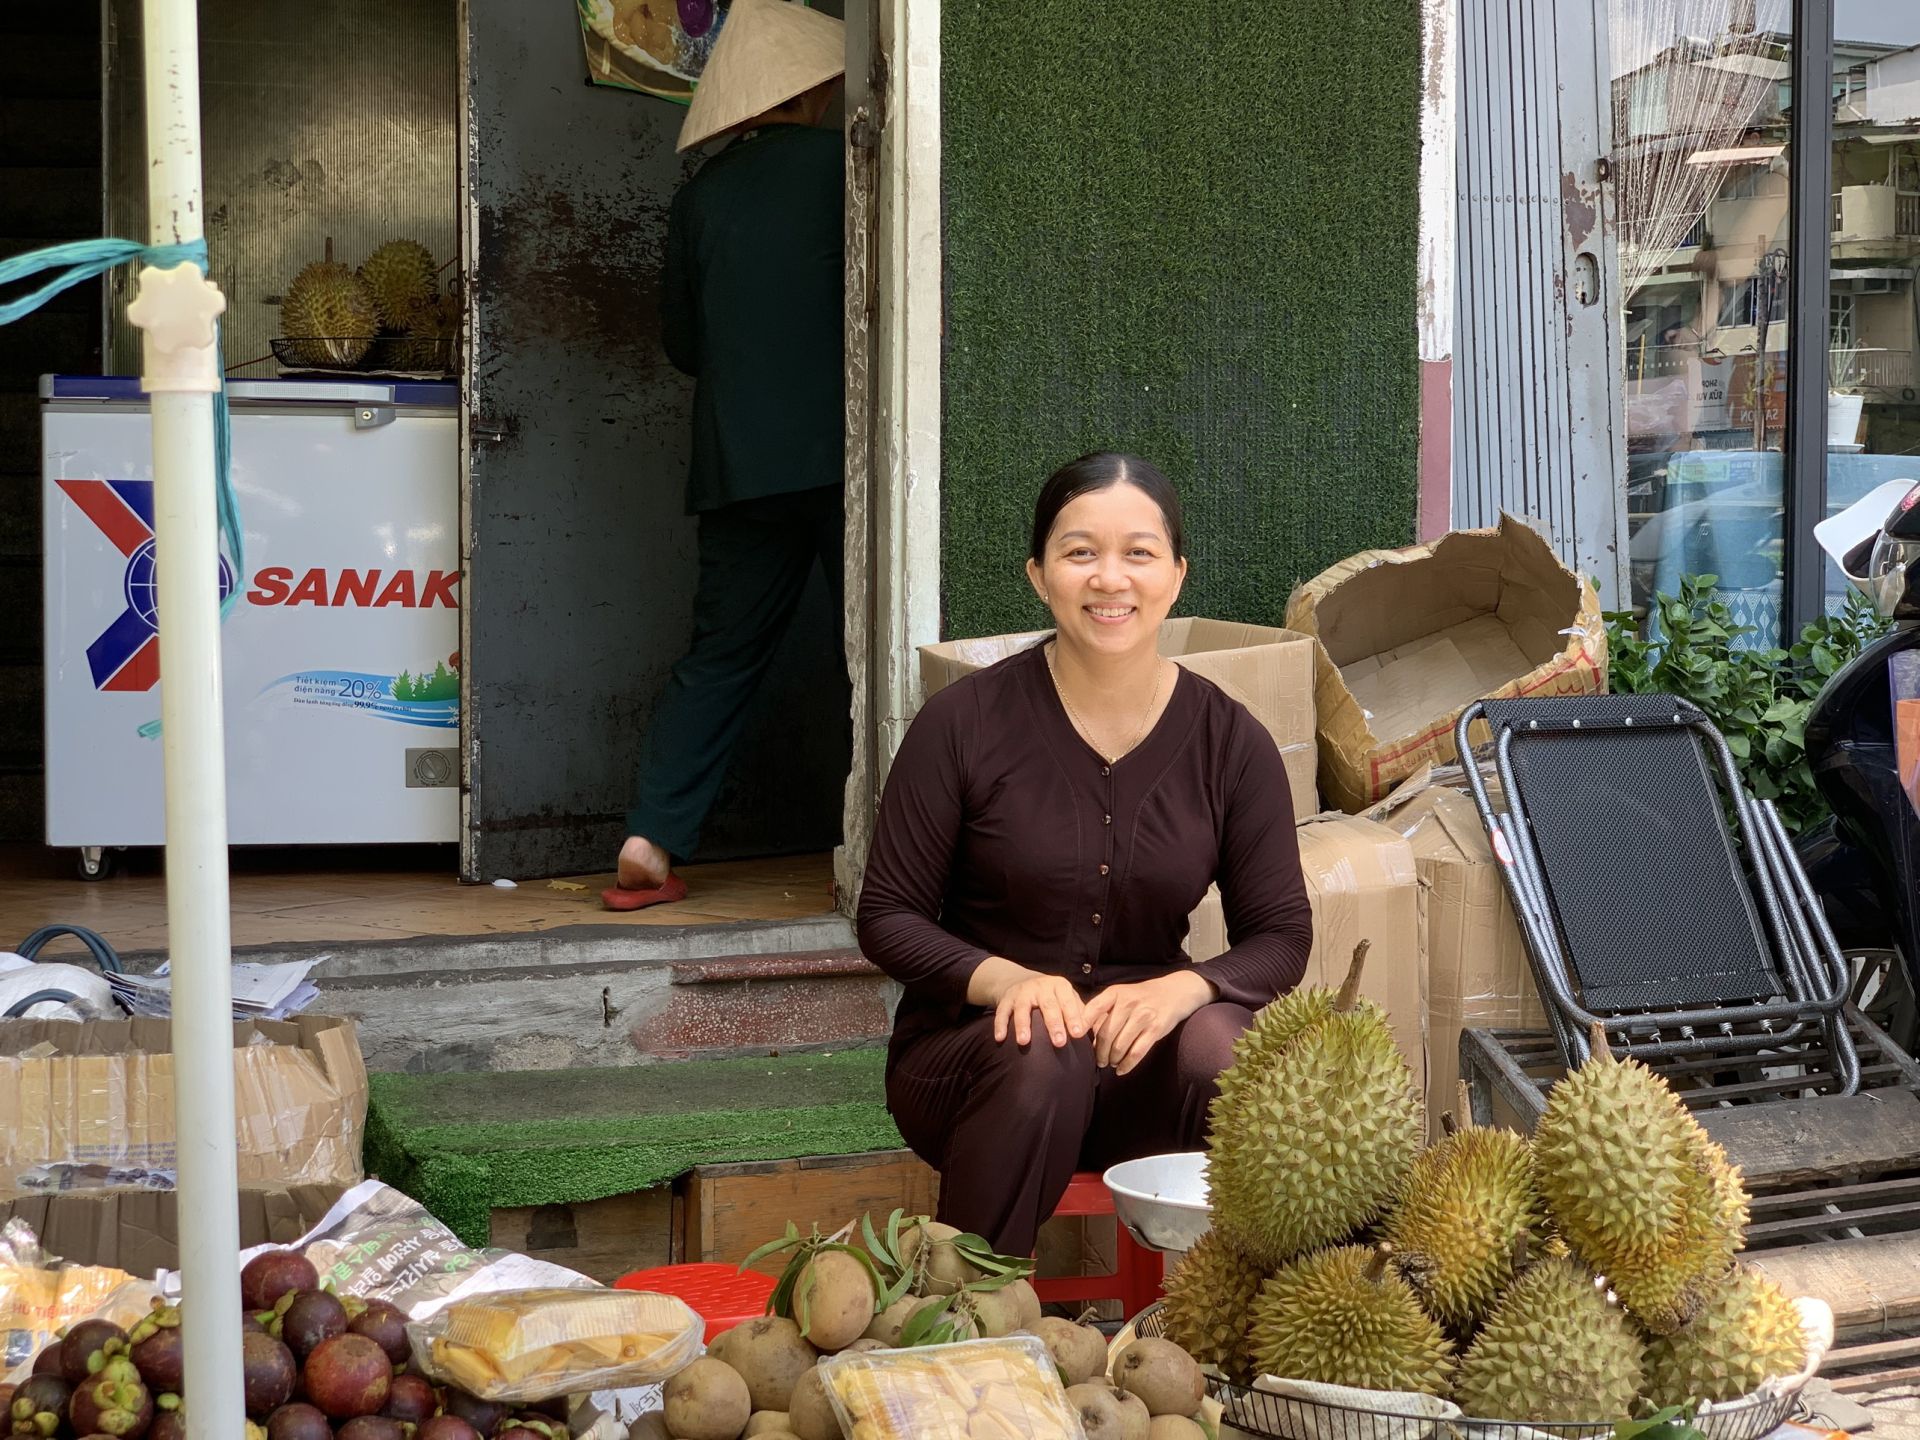 The area selling fresh fruits purchased from farmers in Vĩnh Long province at Amitaba Restaurant.